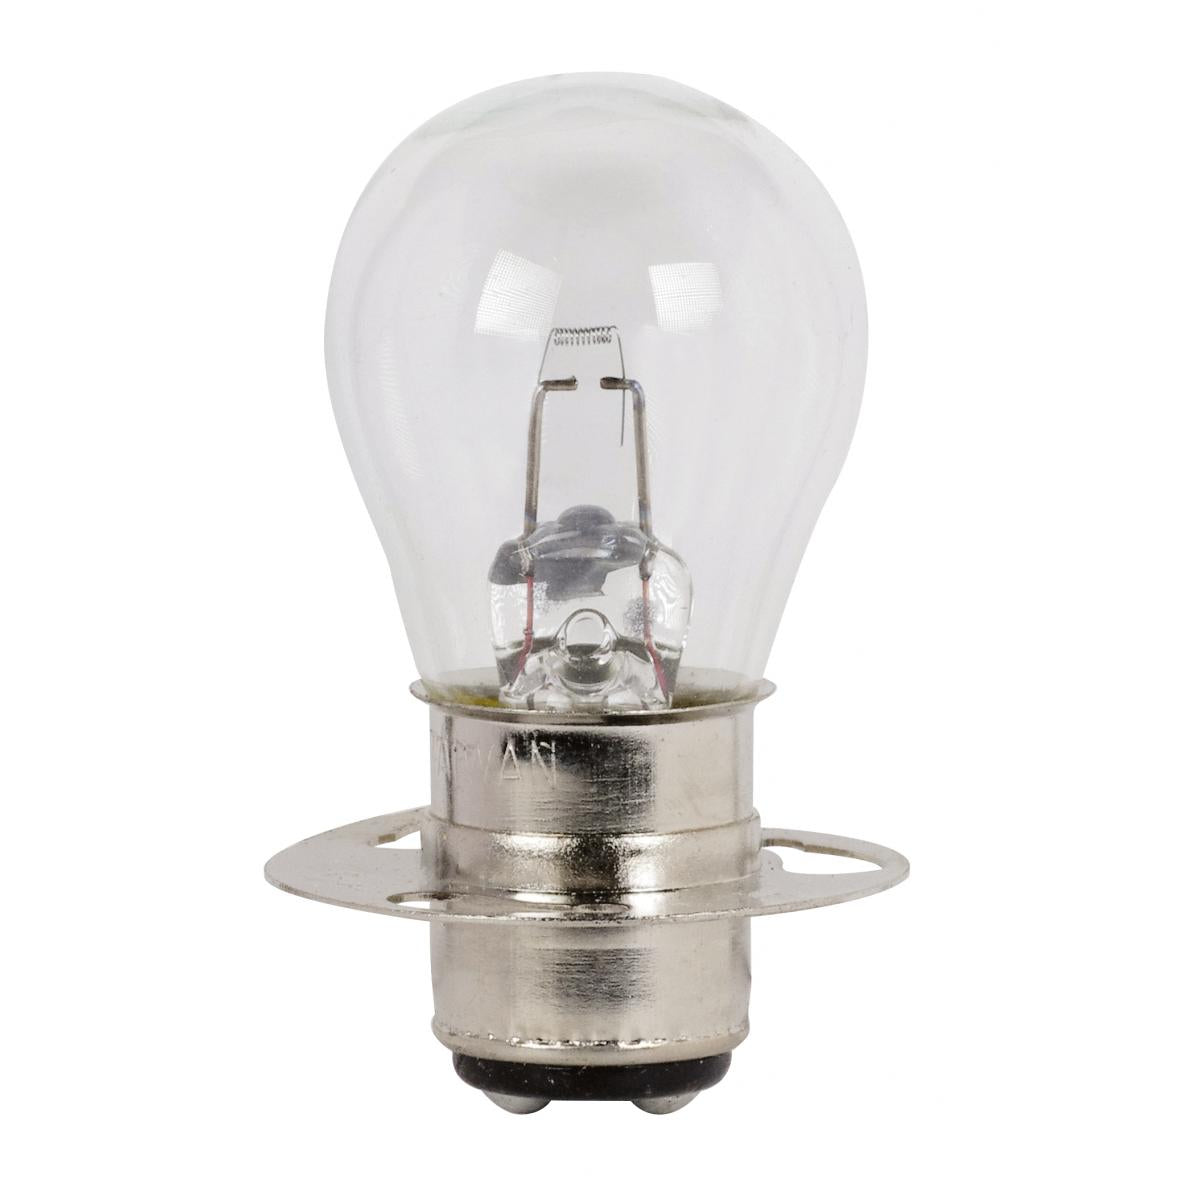 Satco S7070 1630 17.9 Watt miniature S8 500 Average rated hours Double Contact Pre-focus Flanged base 6.5 Volt